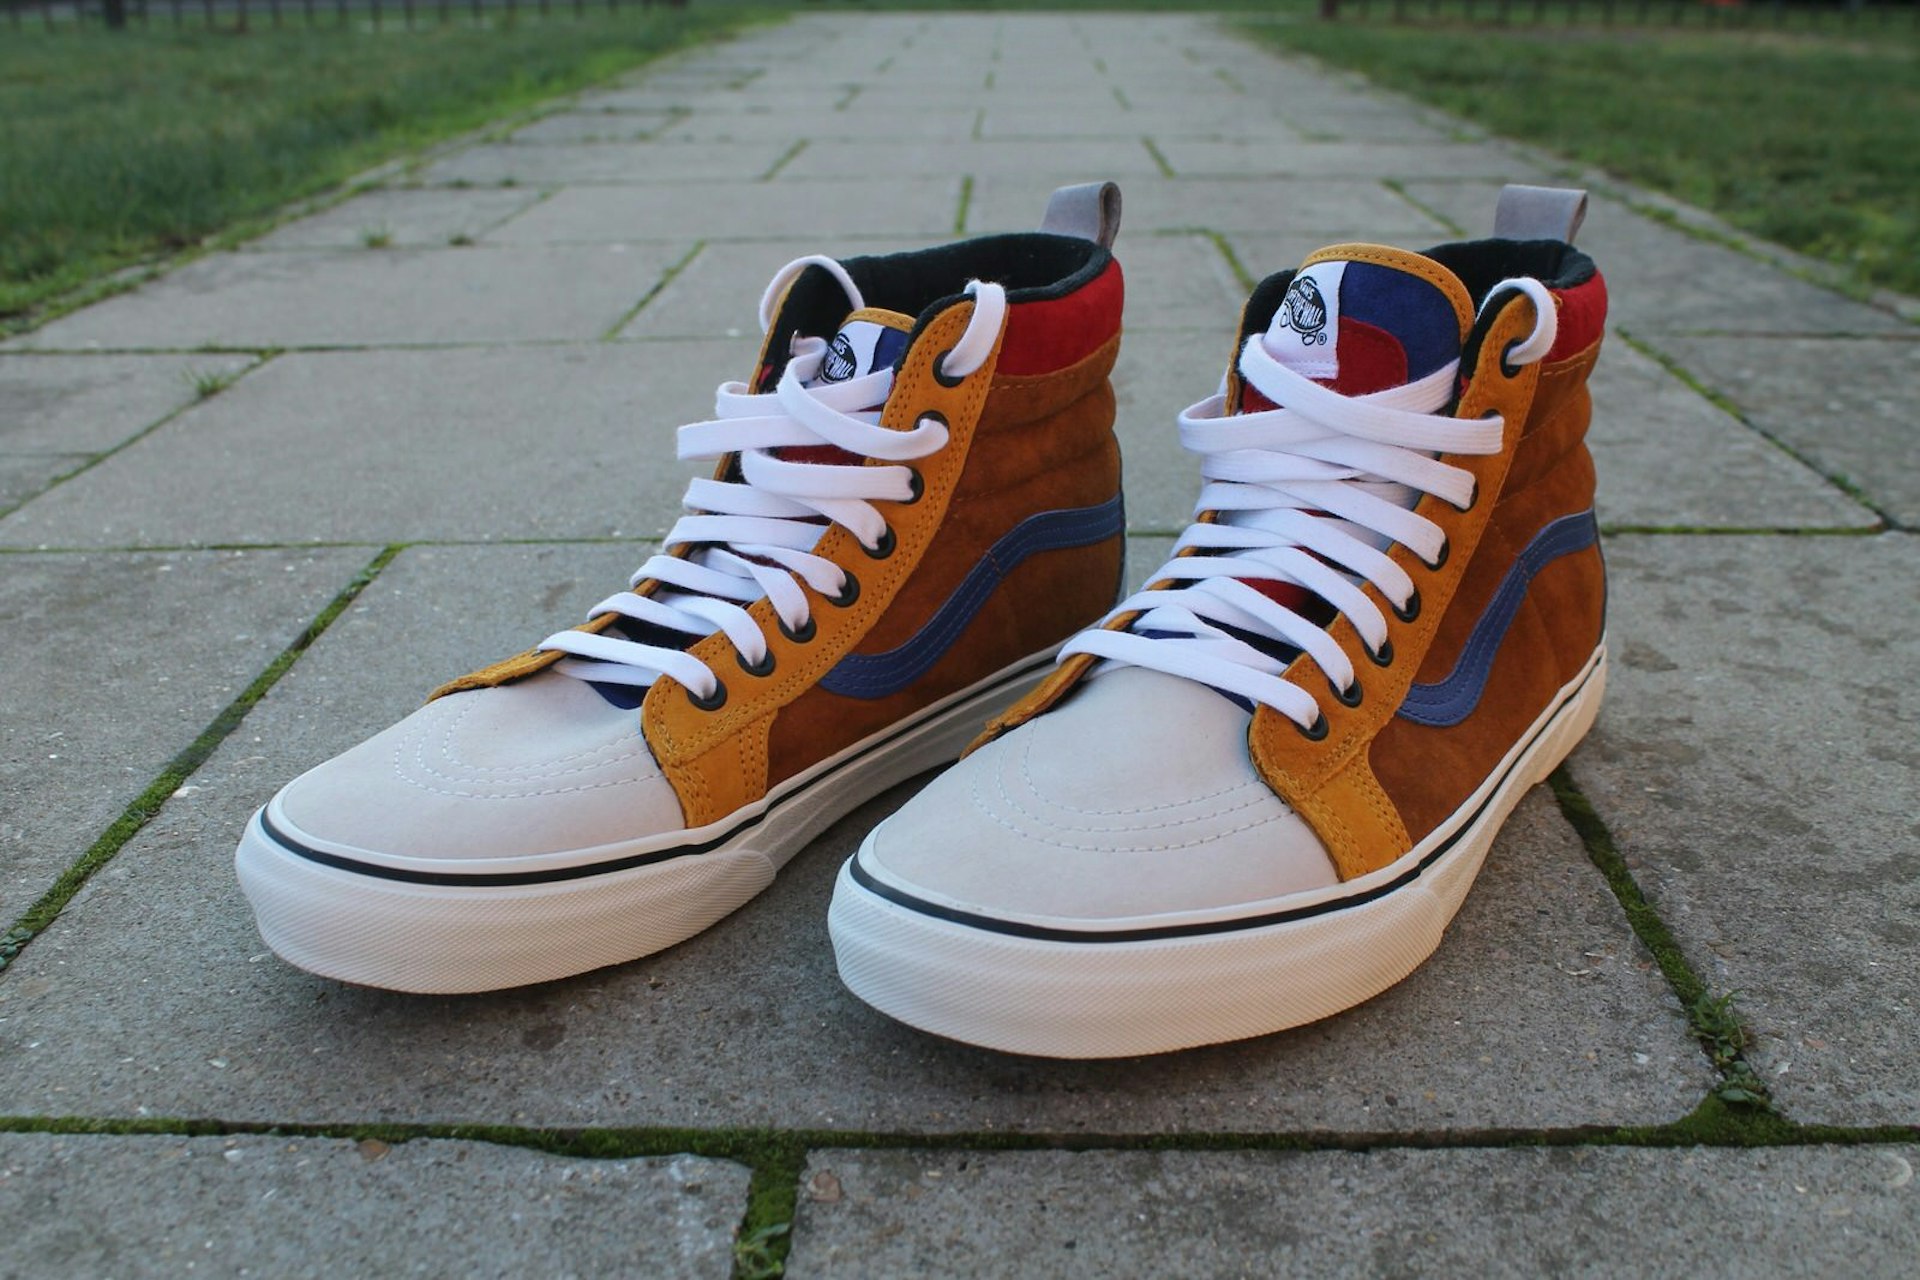 A pair of Vans SK8-HI MTE high-top trainers shown in an eye-catching colour design that includes splashes of brown, blue, yellow and red